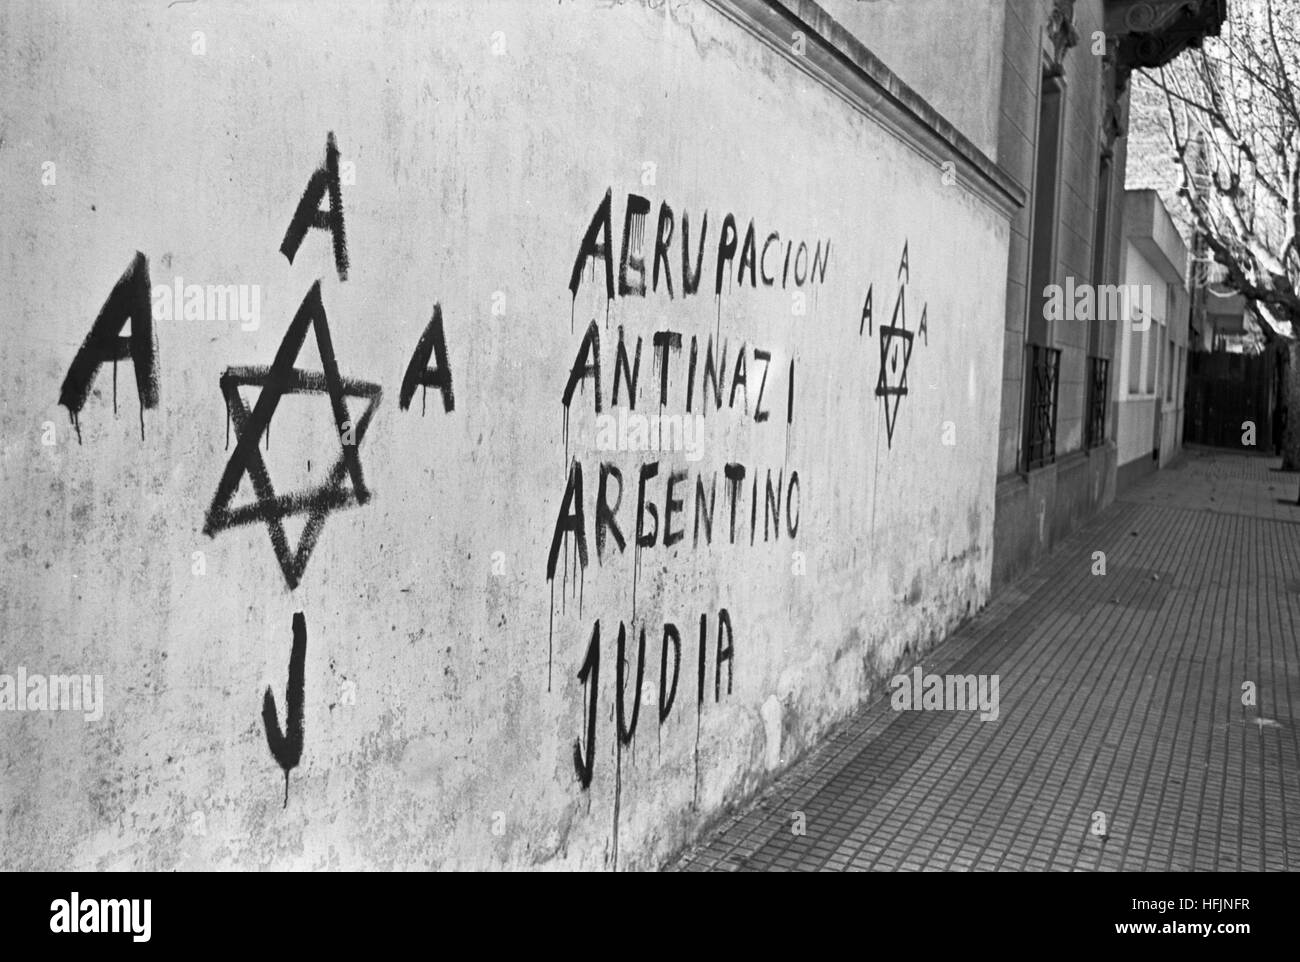 Anti-Nazi graffiti in Buenos Aires, Argentina, 1962. Far rights groups had been painting swastikas around Buenos Aires, which apparently caused anti-Nazi graffiti to appear as a response. Stock Photo